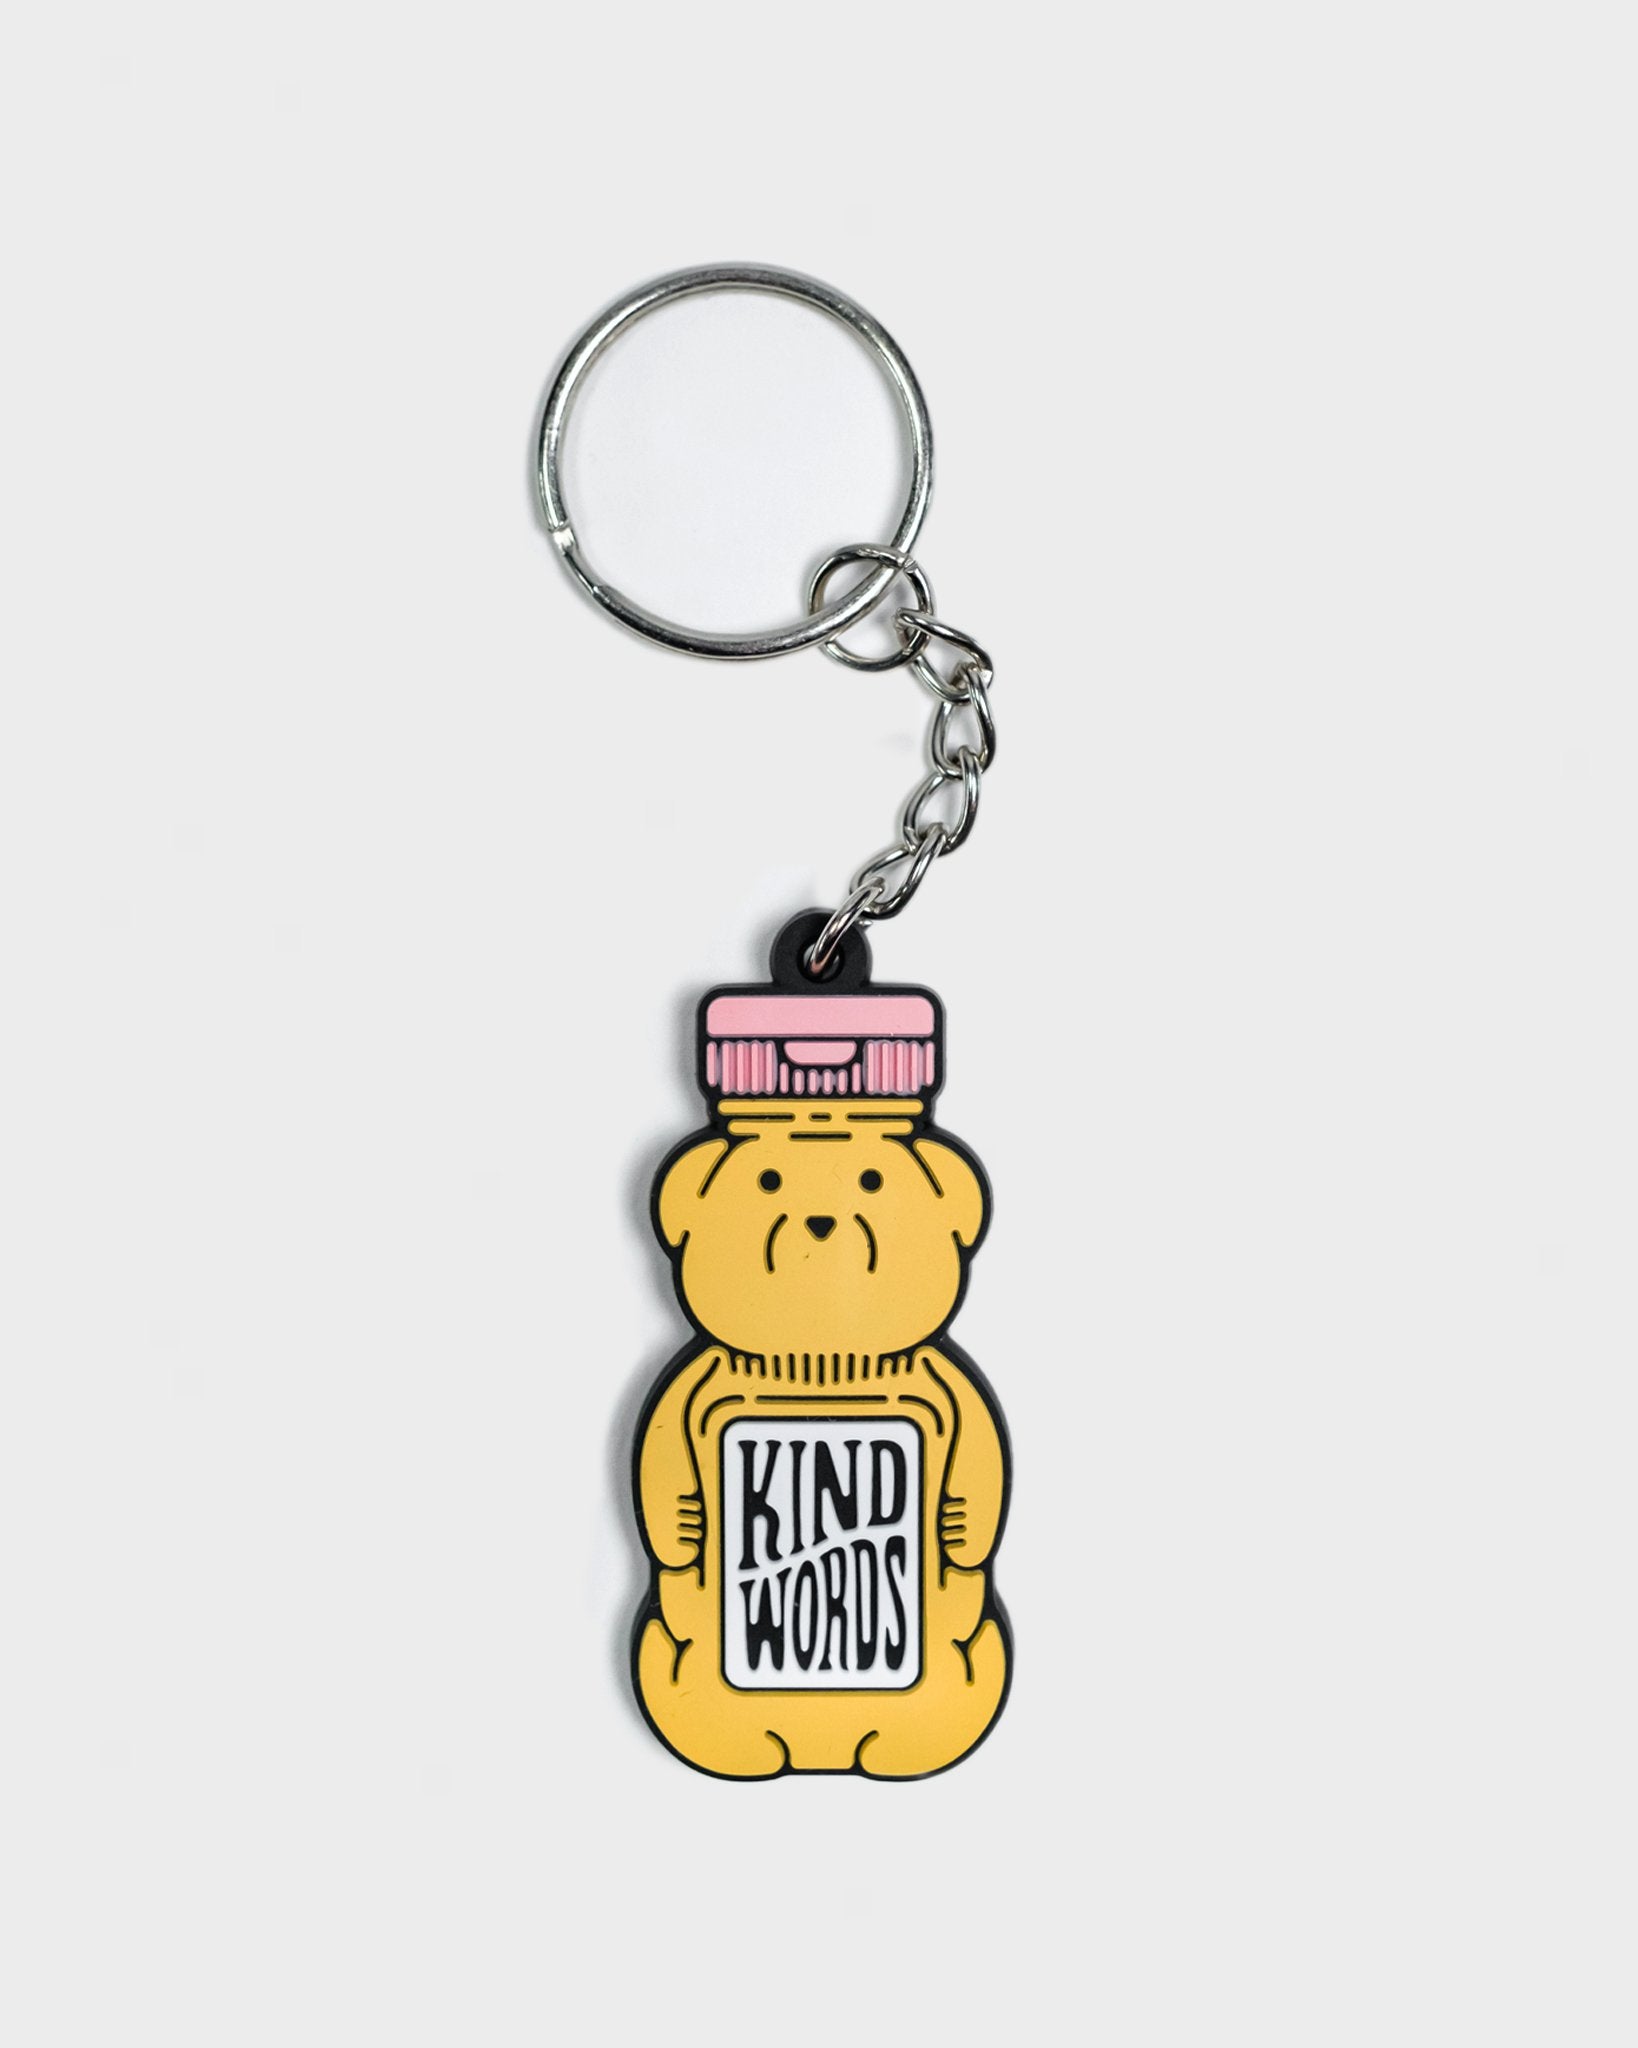 "Kind Words" - Rubber Keychain - Proclamation Coalition